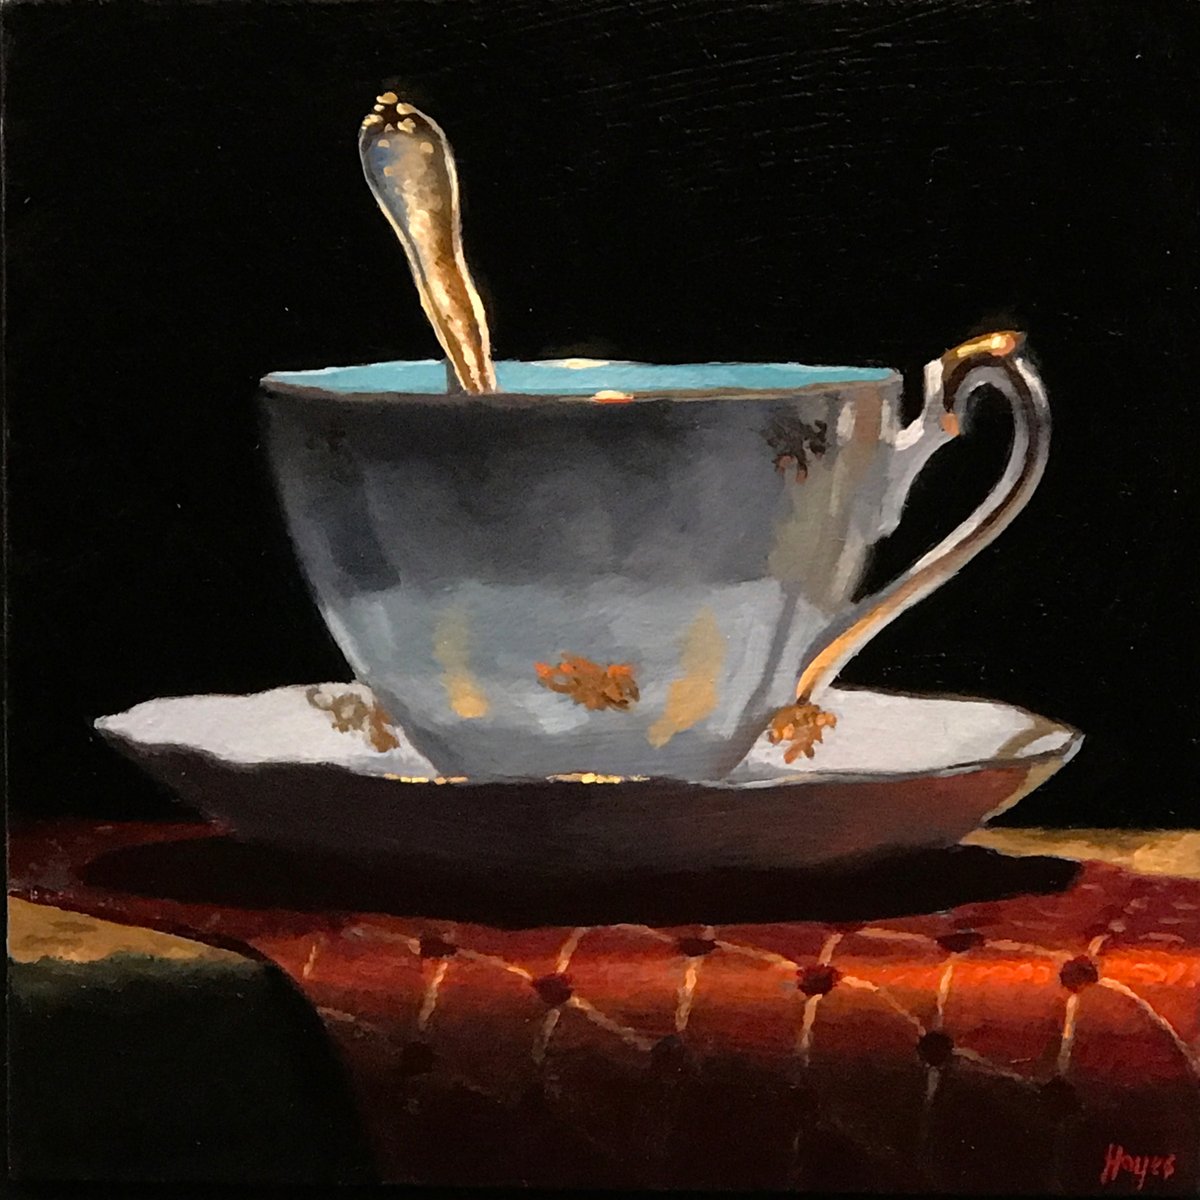 For your enjoyment, this is 'Gold-Trimmed Teacup and Red Brocade' from 2022, oil on panel, 5x5 inches / 12x12 cm (sold). #art #painting #stilllife